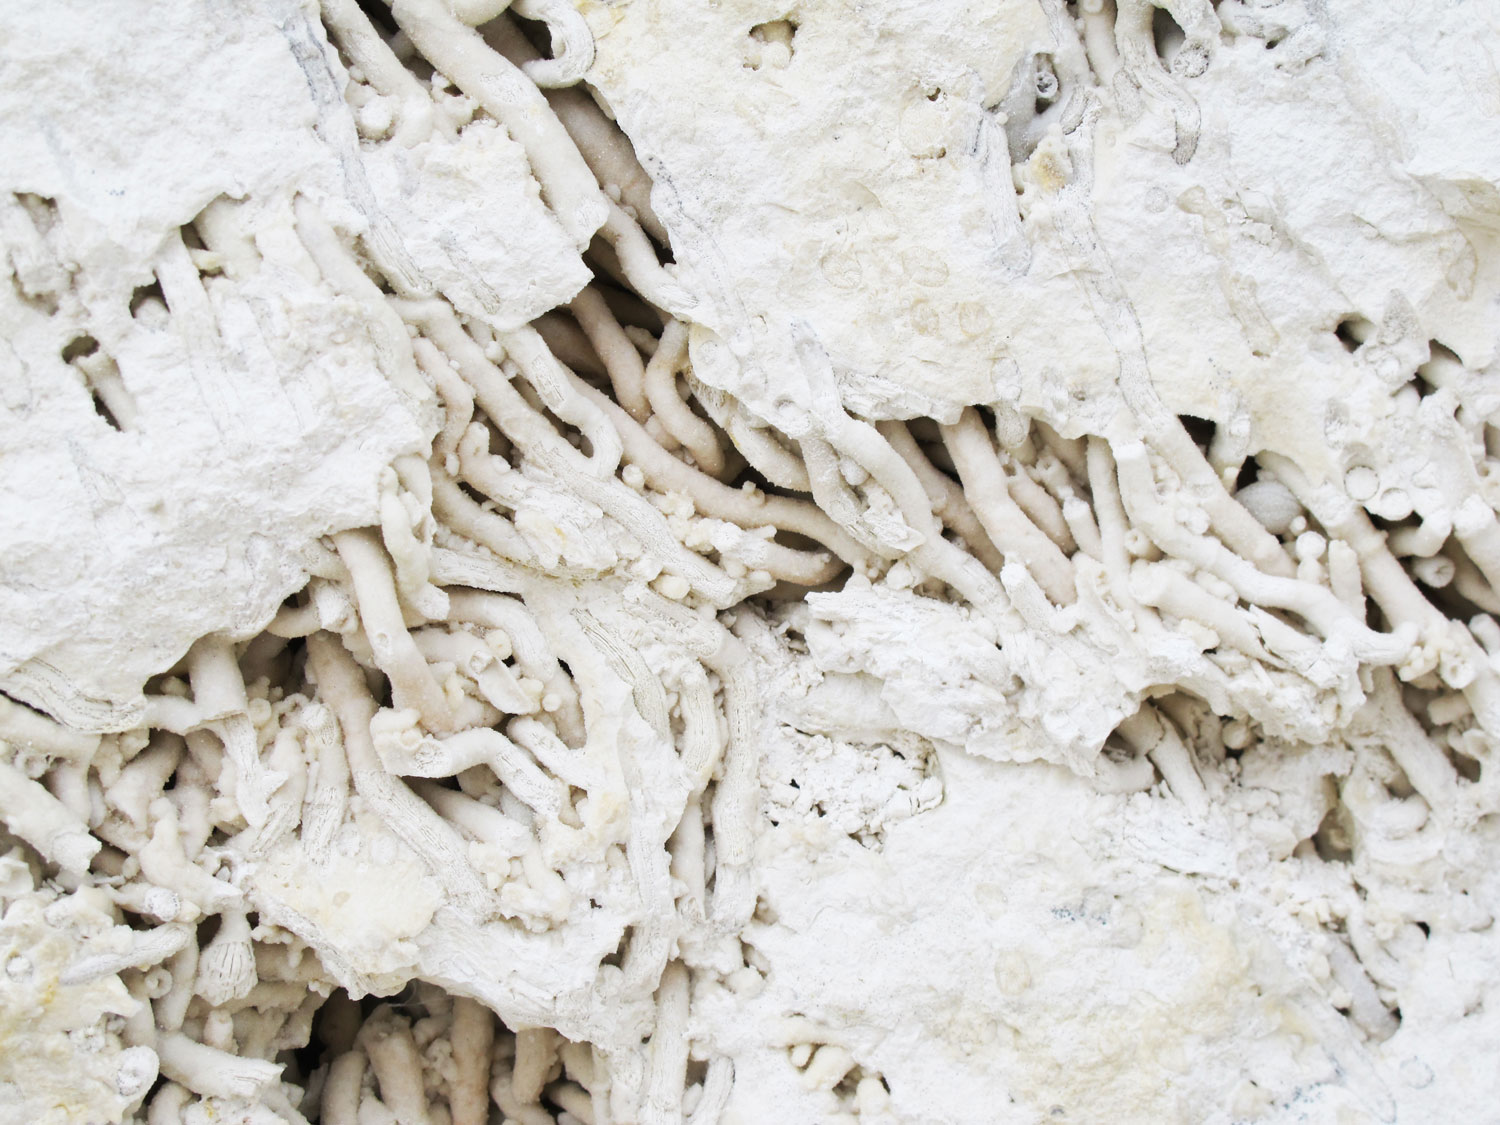 Faxe is a world known manufacturer of natural coral limestone.